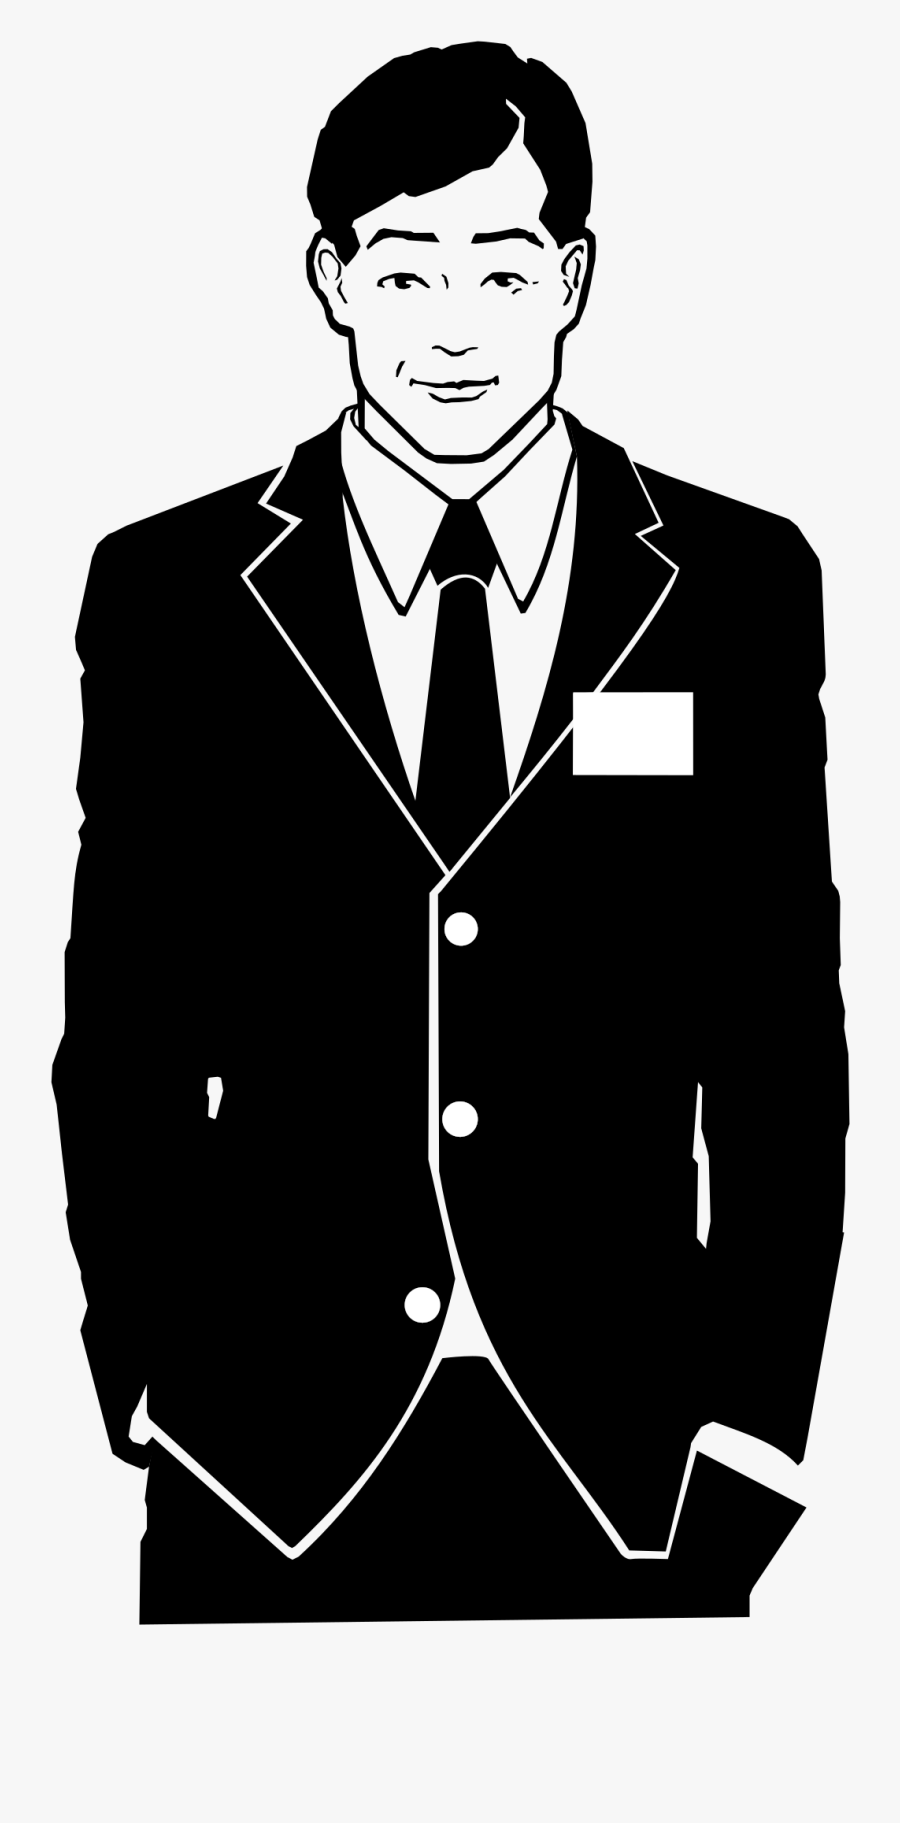 Transparent Guy In Suit Png - Man In Suit Clipart Black And White, Transparent Clipart